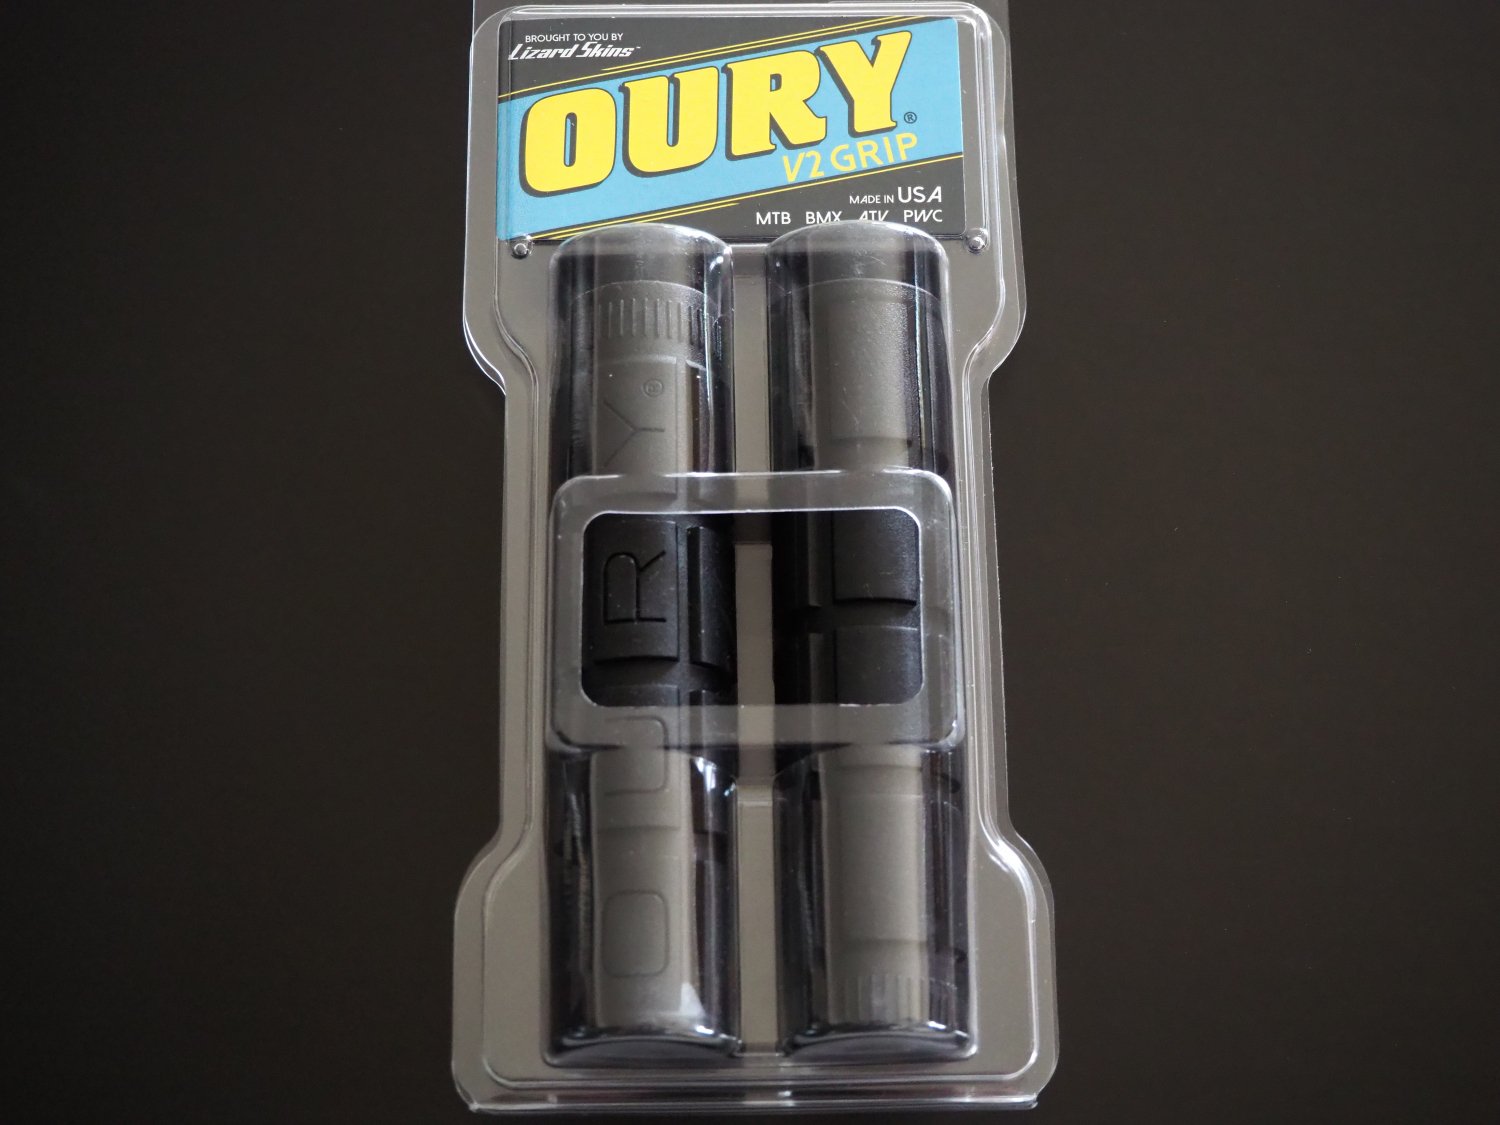 OURY V2 